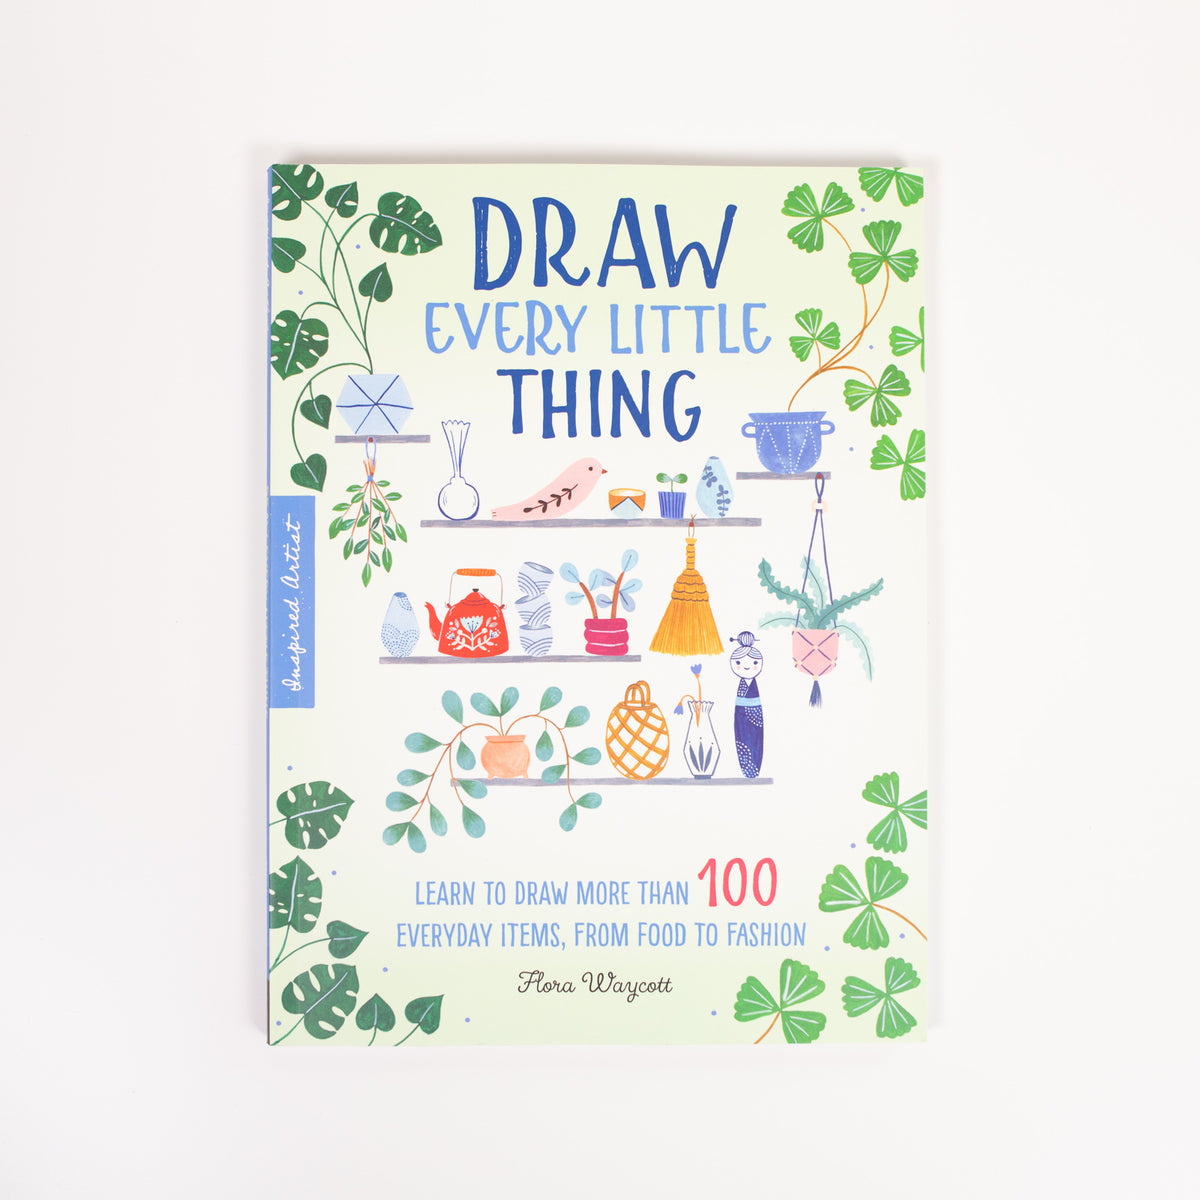 'Draw Every Little Thing' by Flora Waycott